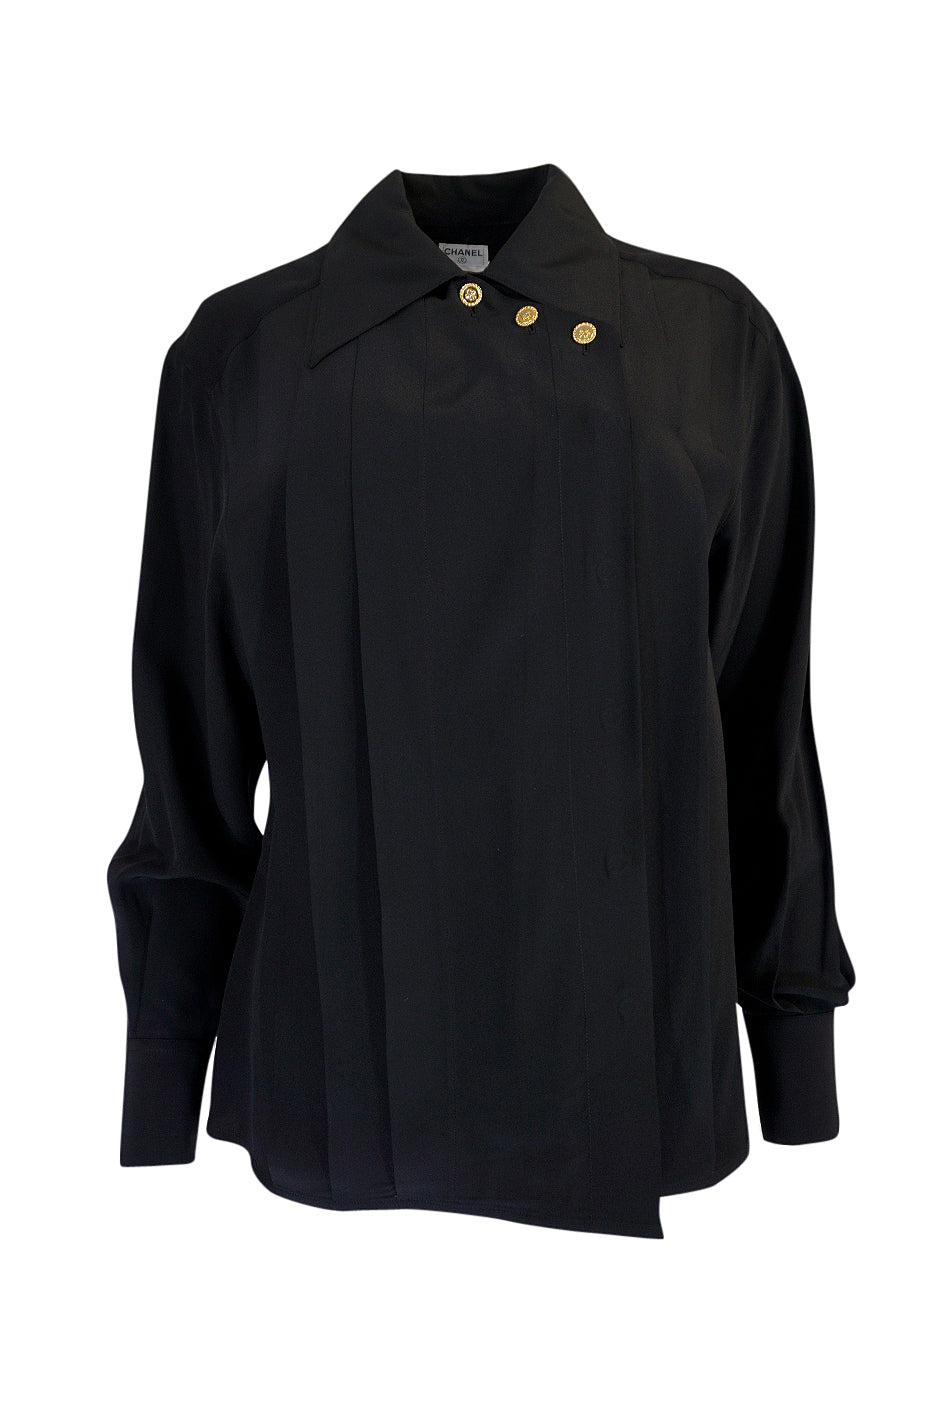 1980s Chanel Black Silk Top w 4 Leaf Clover Gold Buttons – Shrimpton Couture